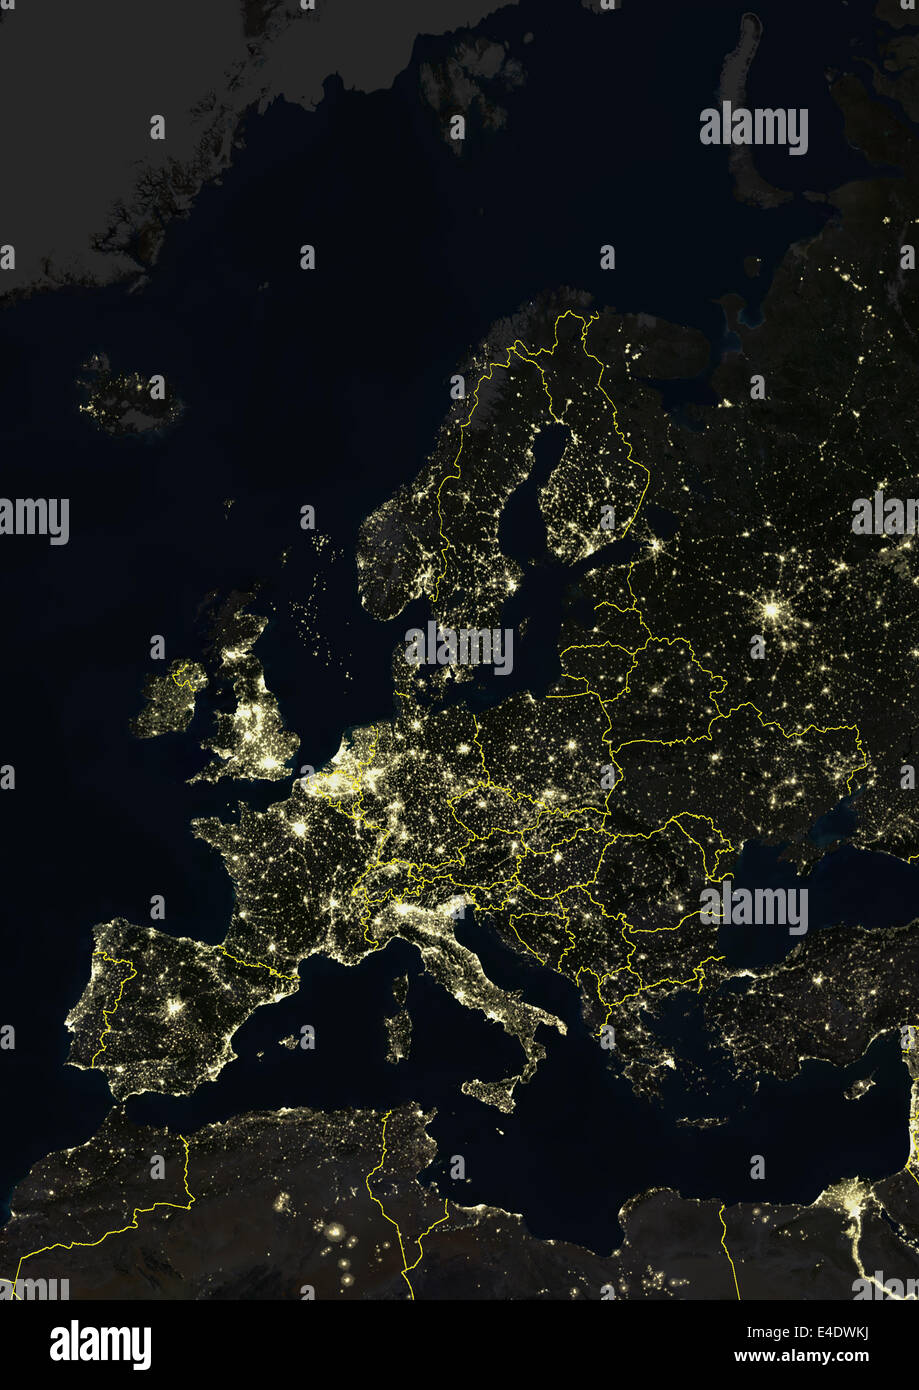 Europe At Night With Country Borders, True Colour Satellite Image. True colour satellite image of Europe at night with country b Stock Photo